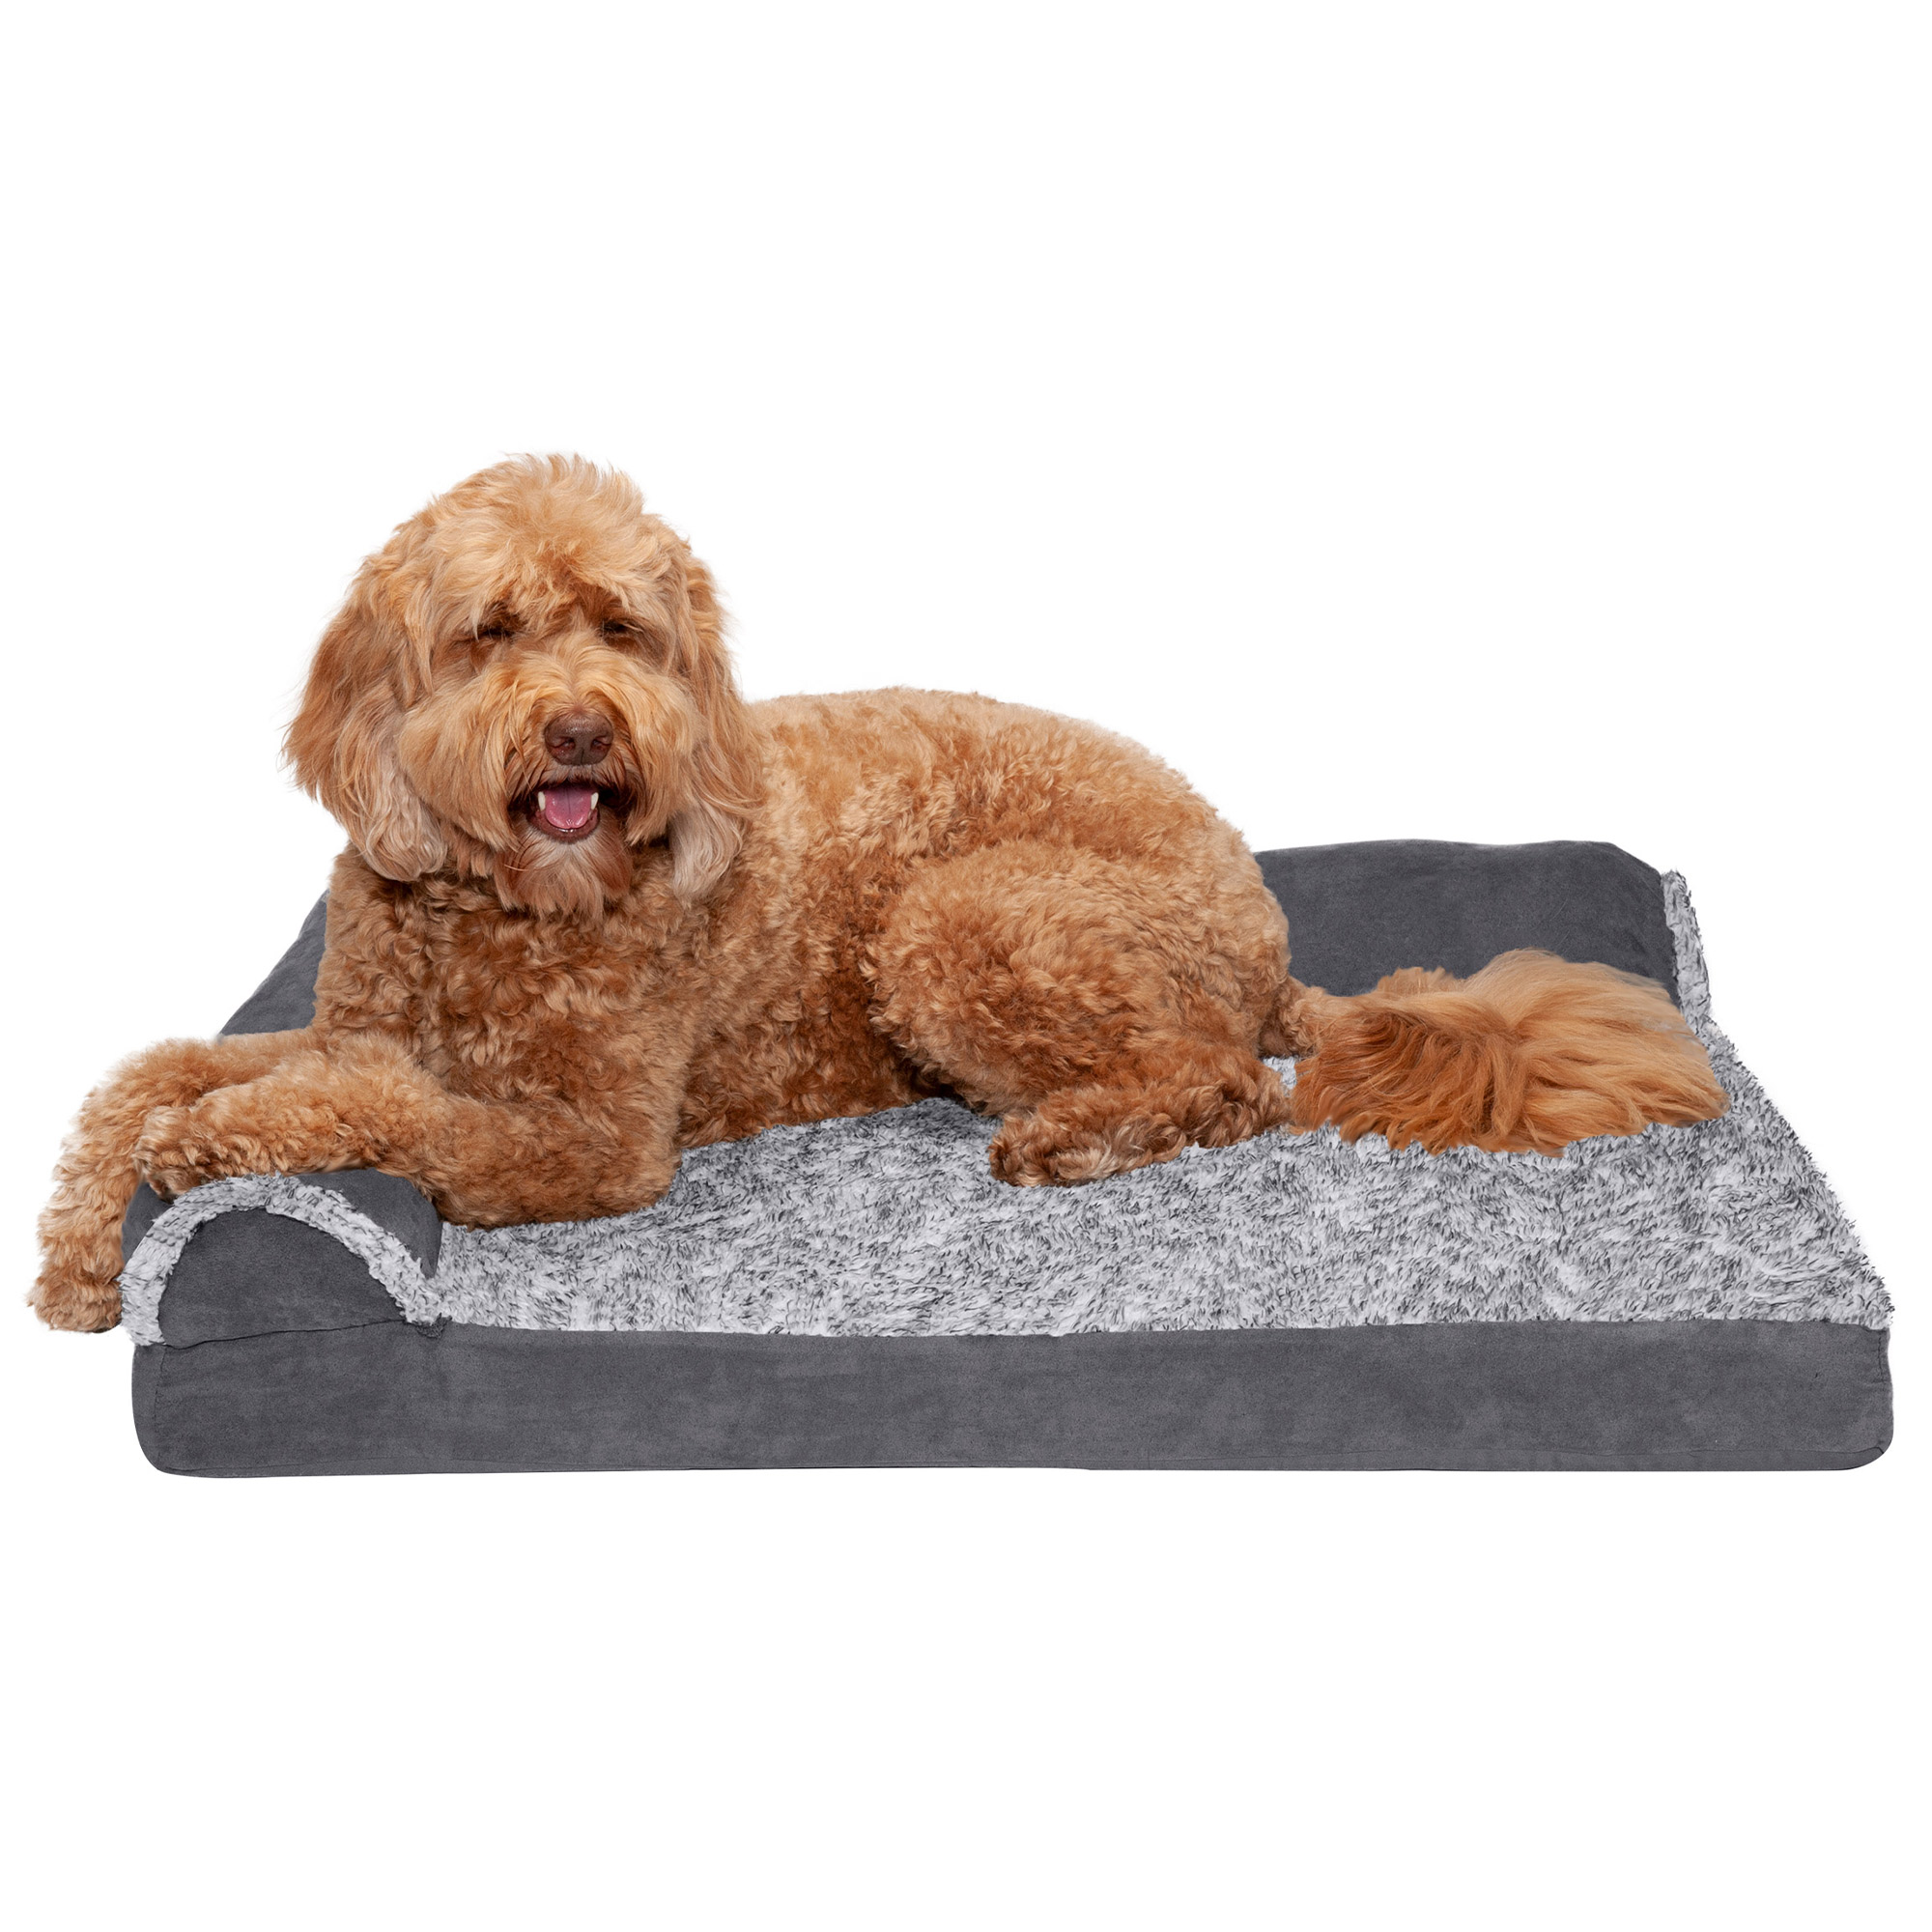 FurHaven Pet Products Two-Tone Faux Fur & Suede Orthopedic Deluxe Chaise Lounge Pet Bed for Dogs & Cats - Stone Gray, Large - image 1 of 16